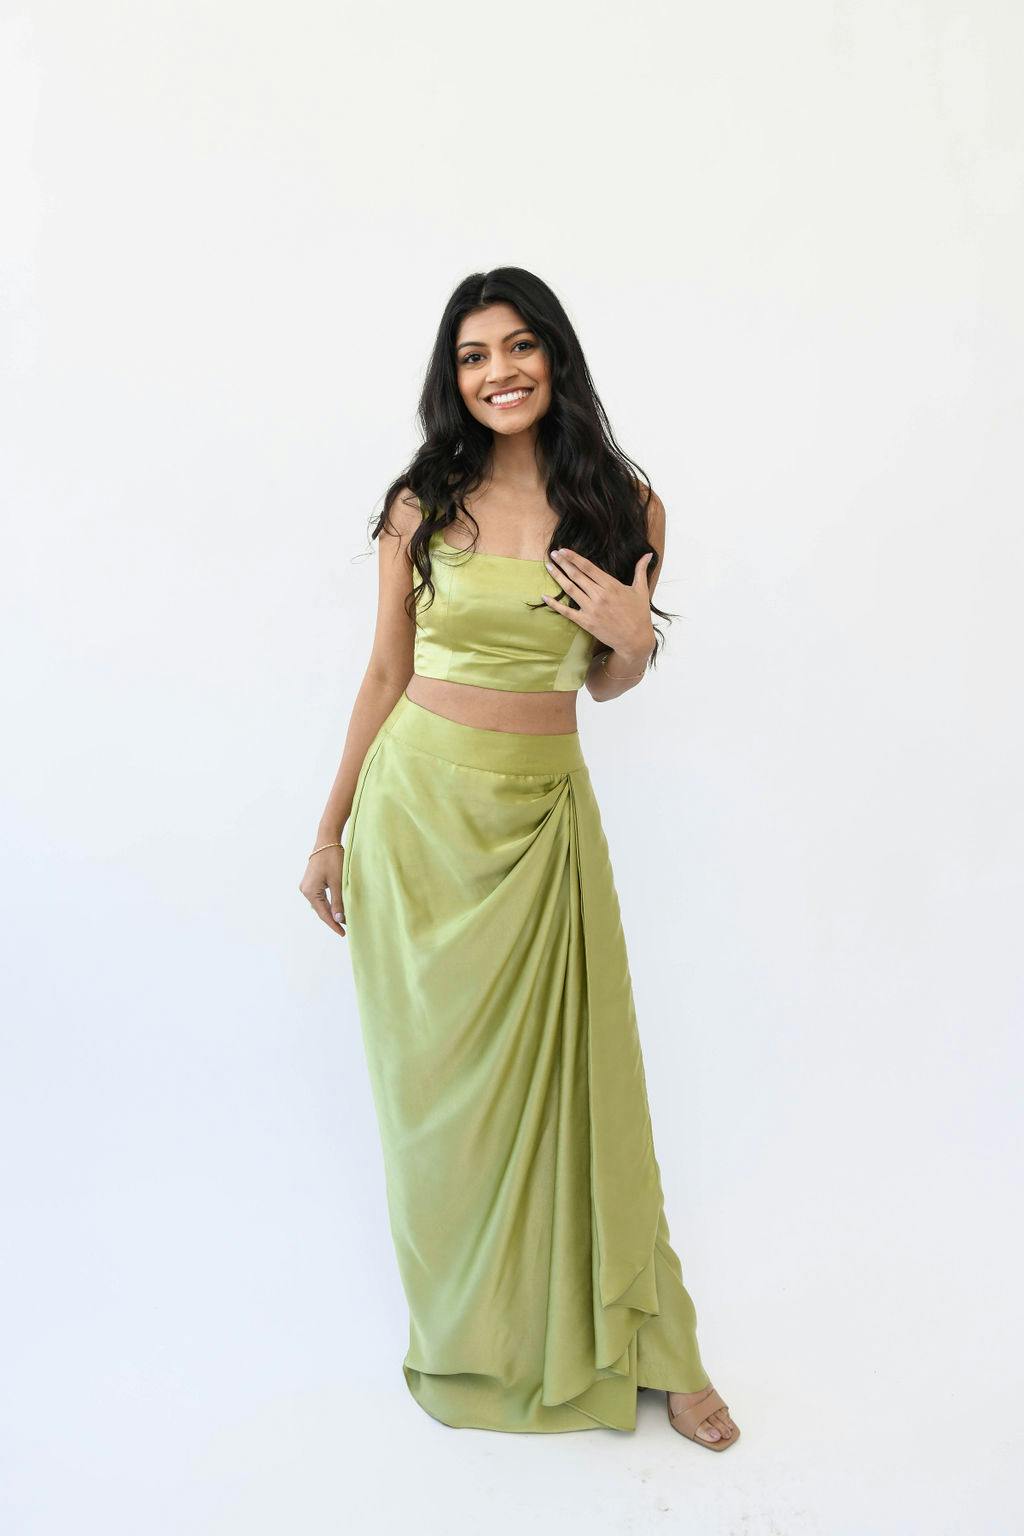 Pista Green Satin Drape Skirt & Blouse Set, a product by MOR Collections